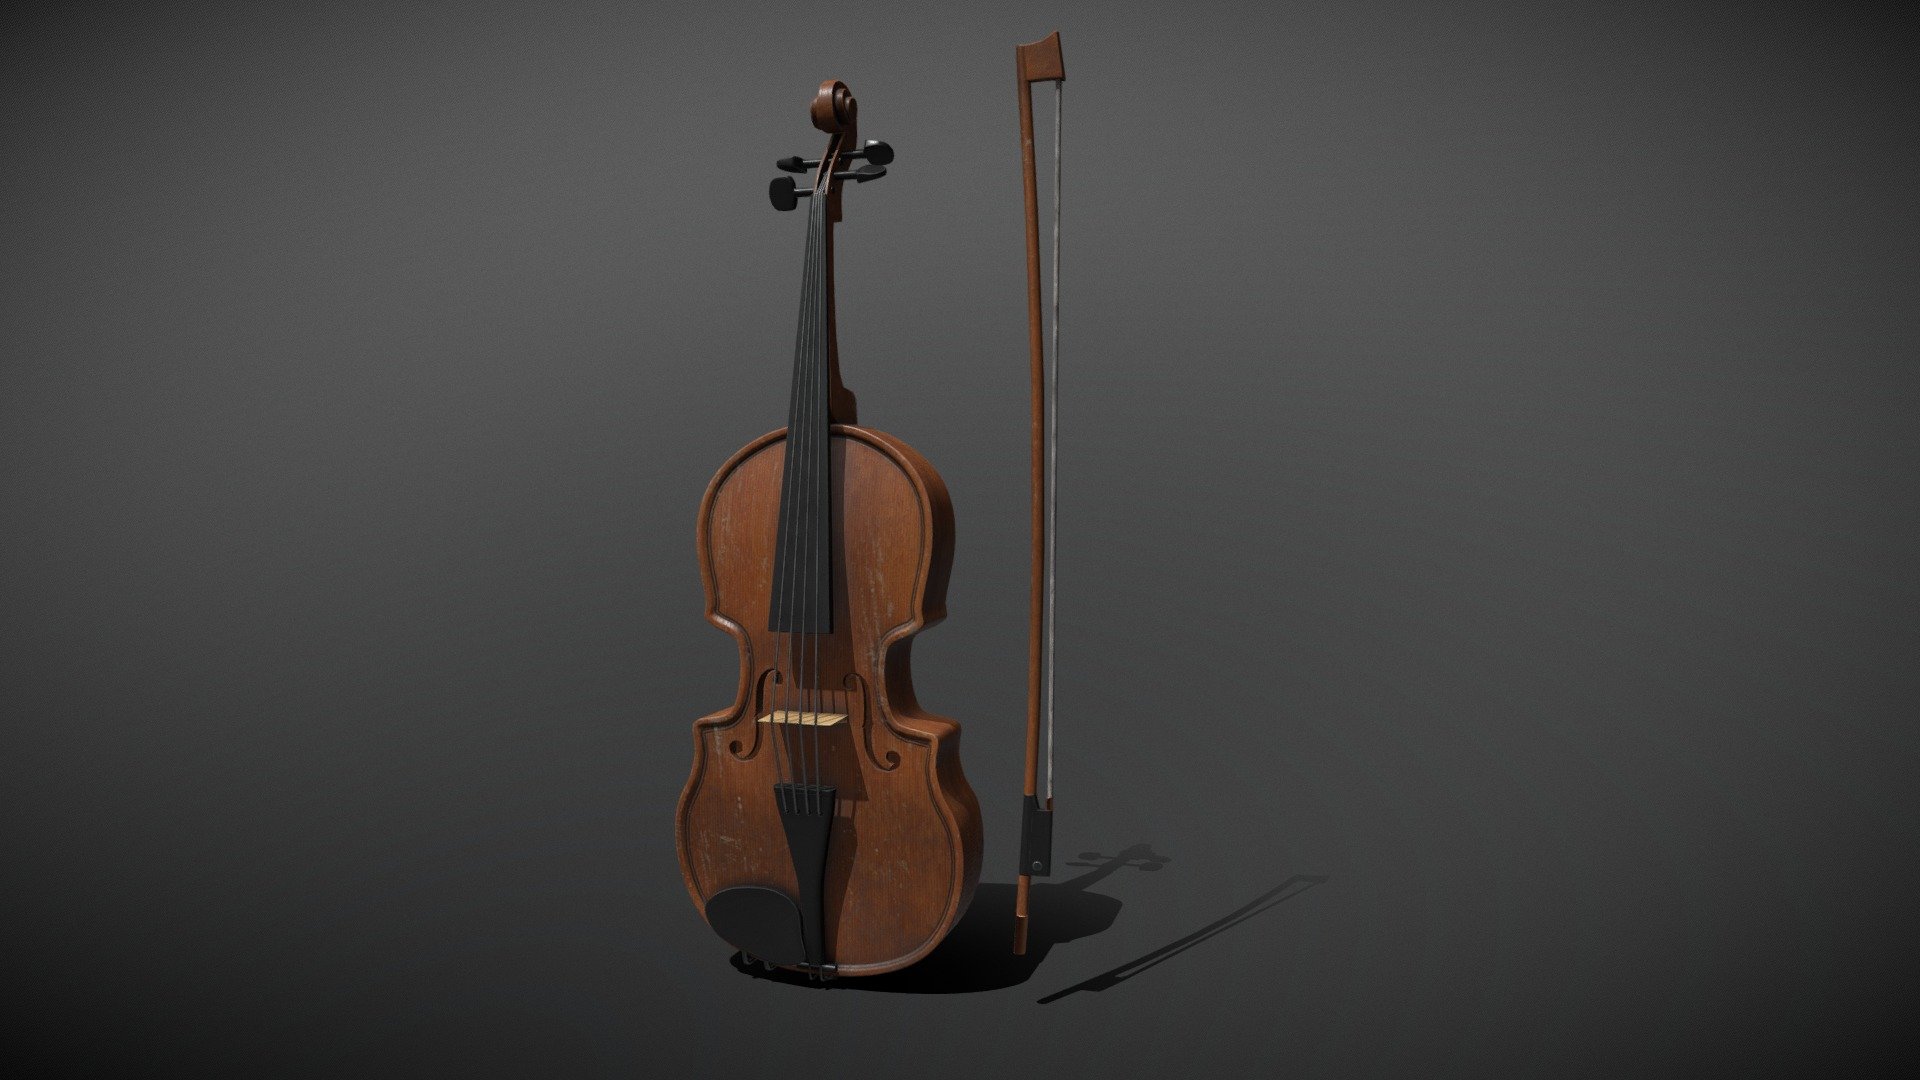 ~7400 Tris Game Ready Asset

4K Textures for Inspection view - Old Violin & Bow - Buy Royalty Free 3D model by PedroKlein 3d model